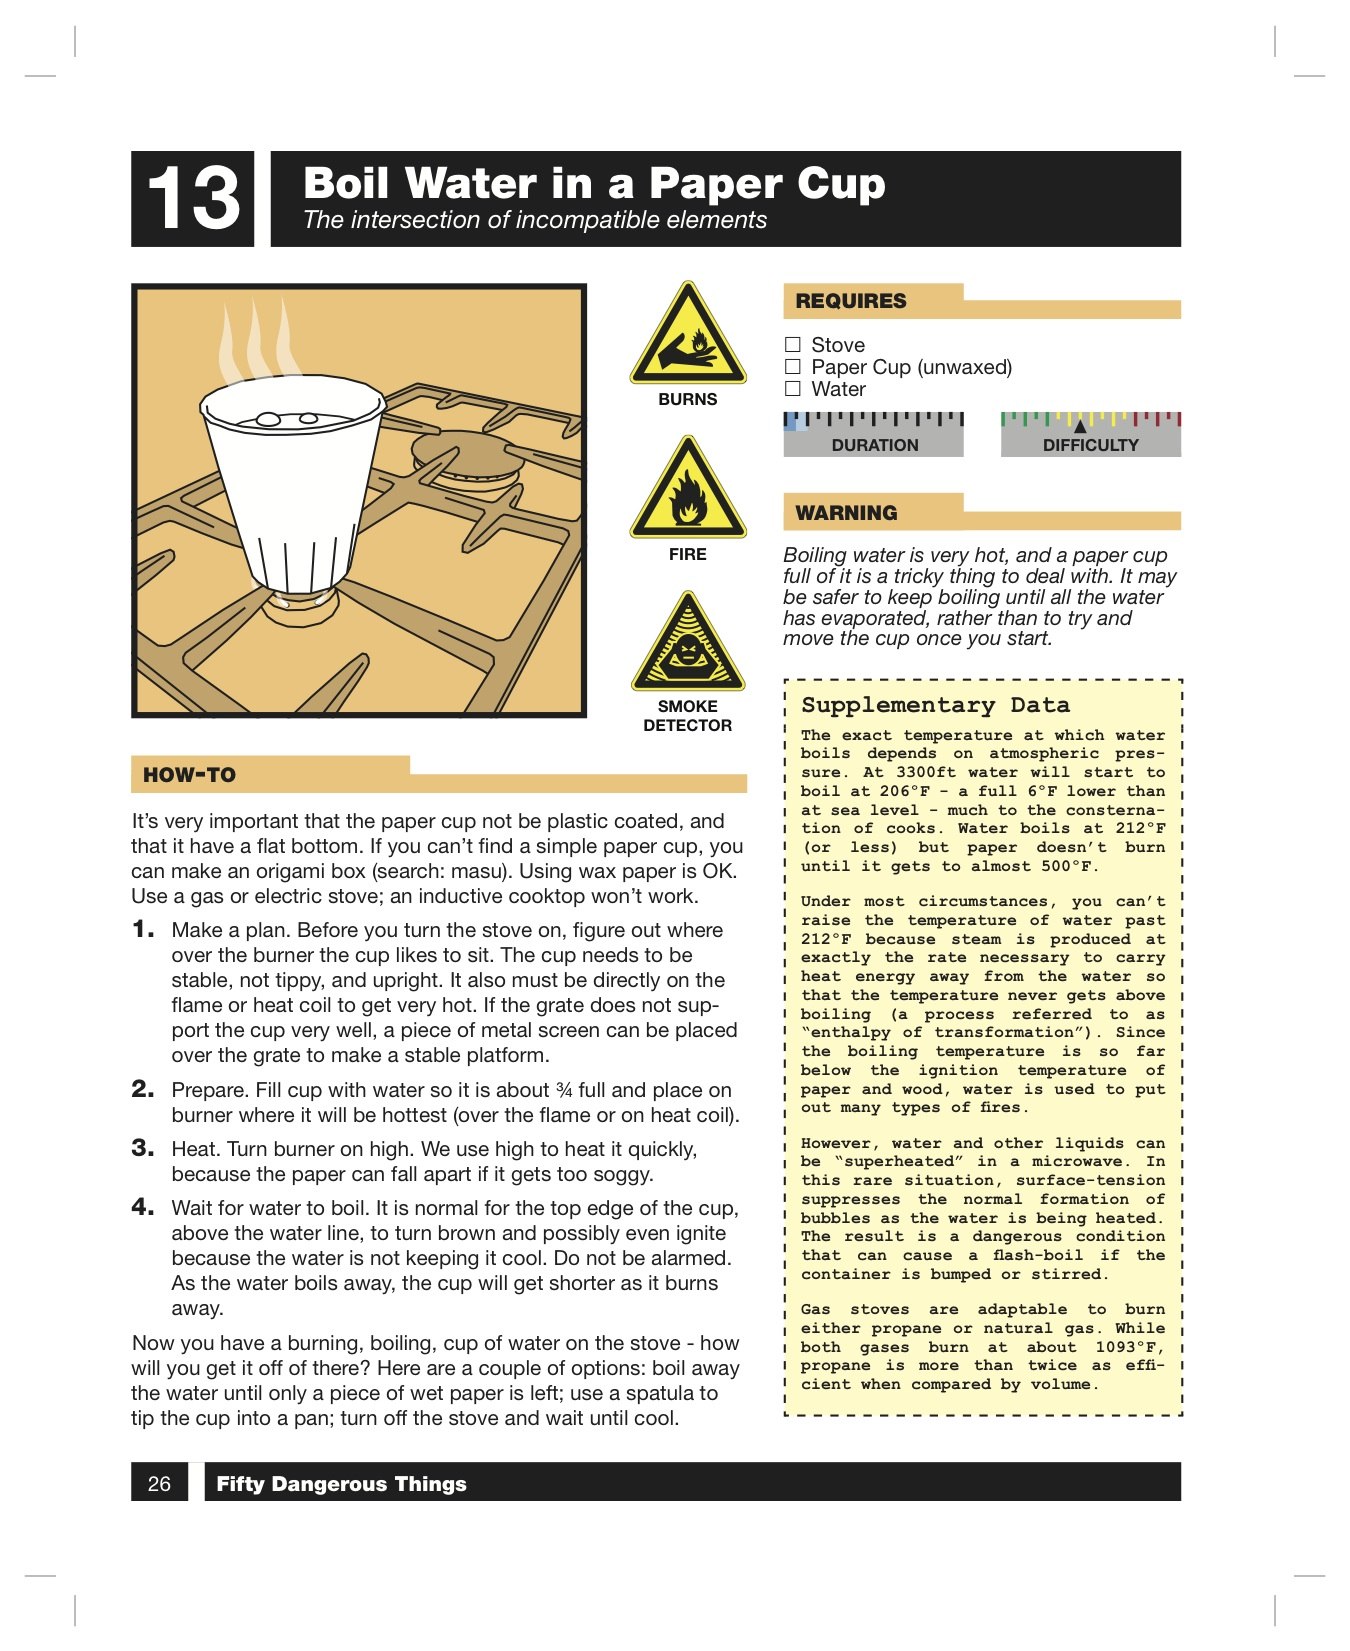 From 50 Dangerous Things: boil water in a paper cup - Boing Boing